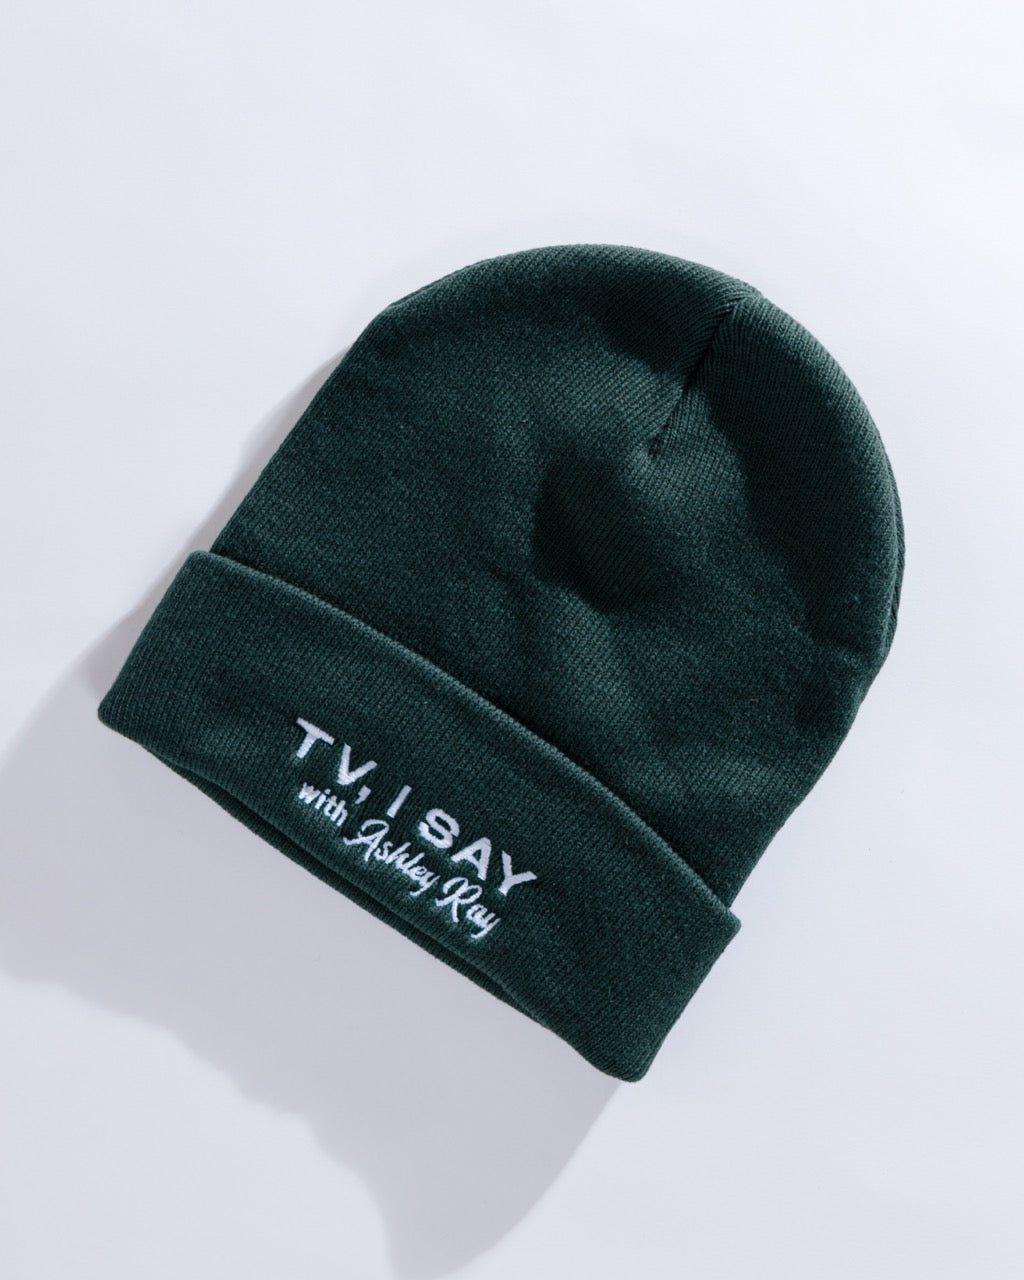 TV, I Say: Embroidered Beanie